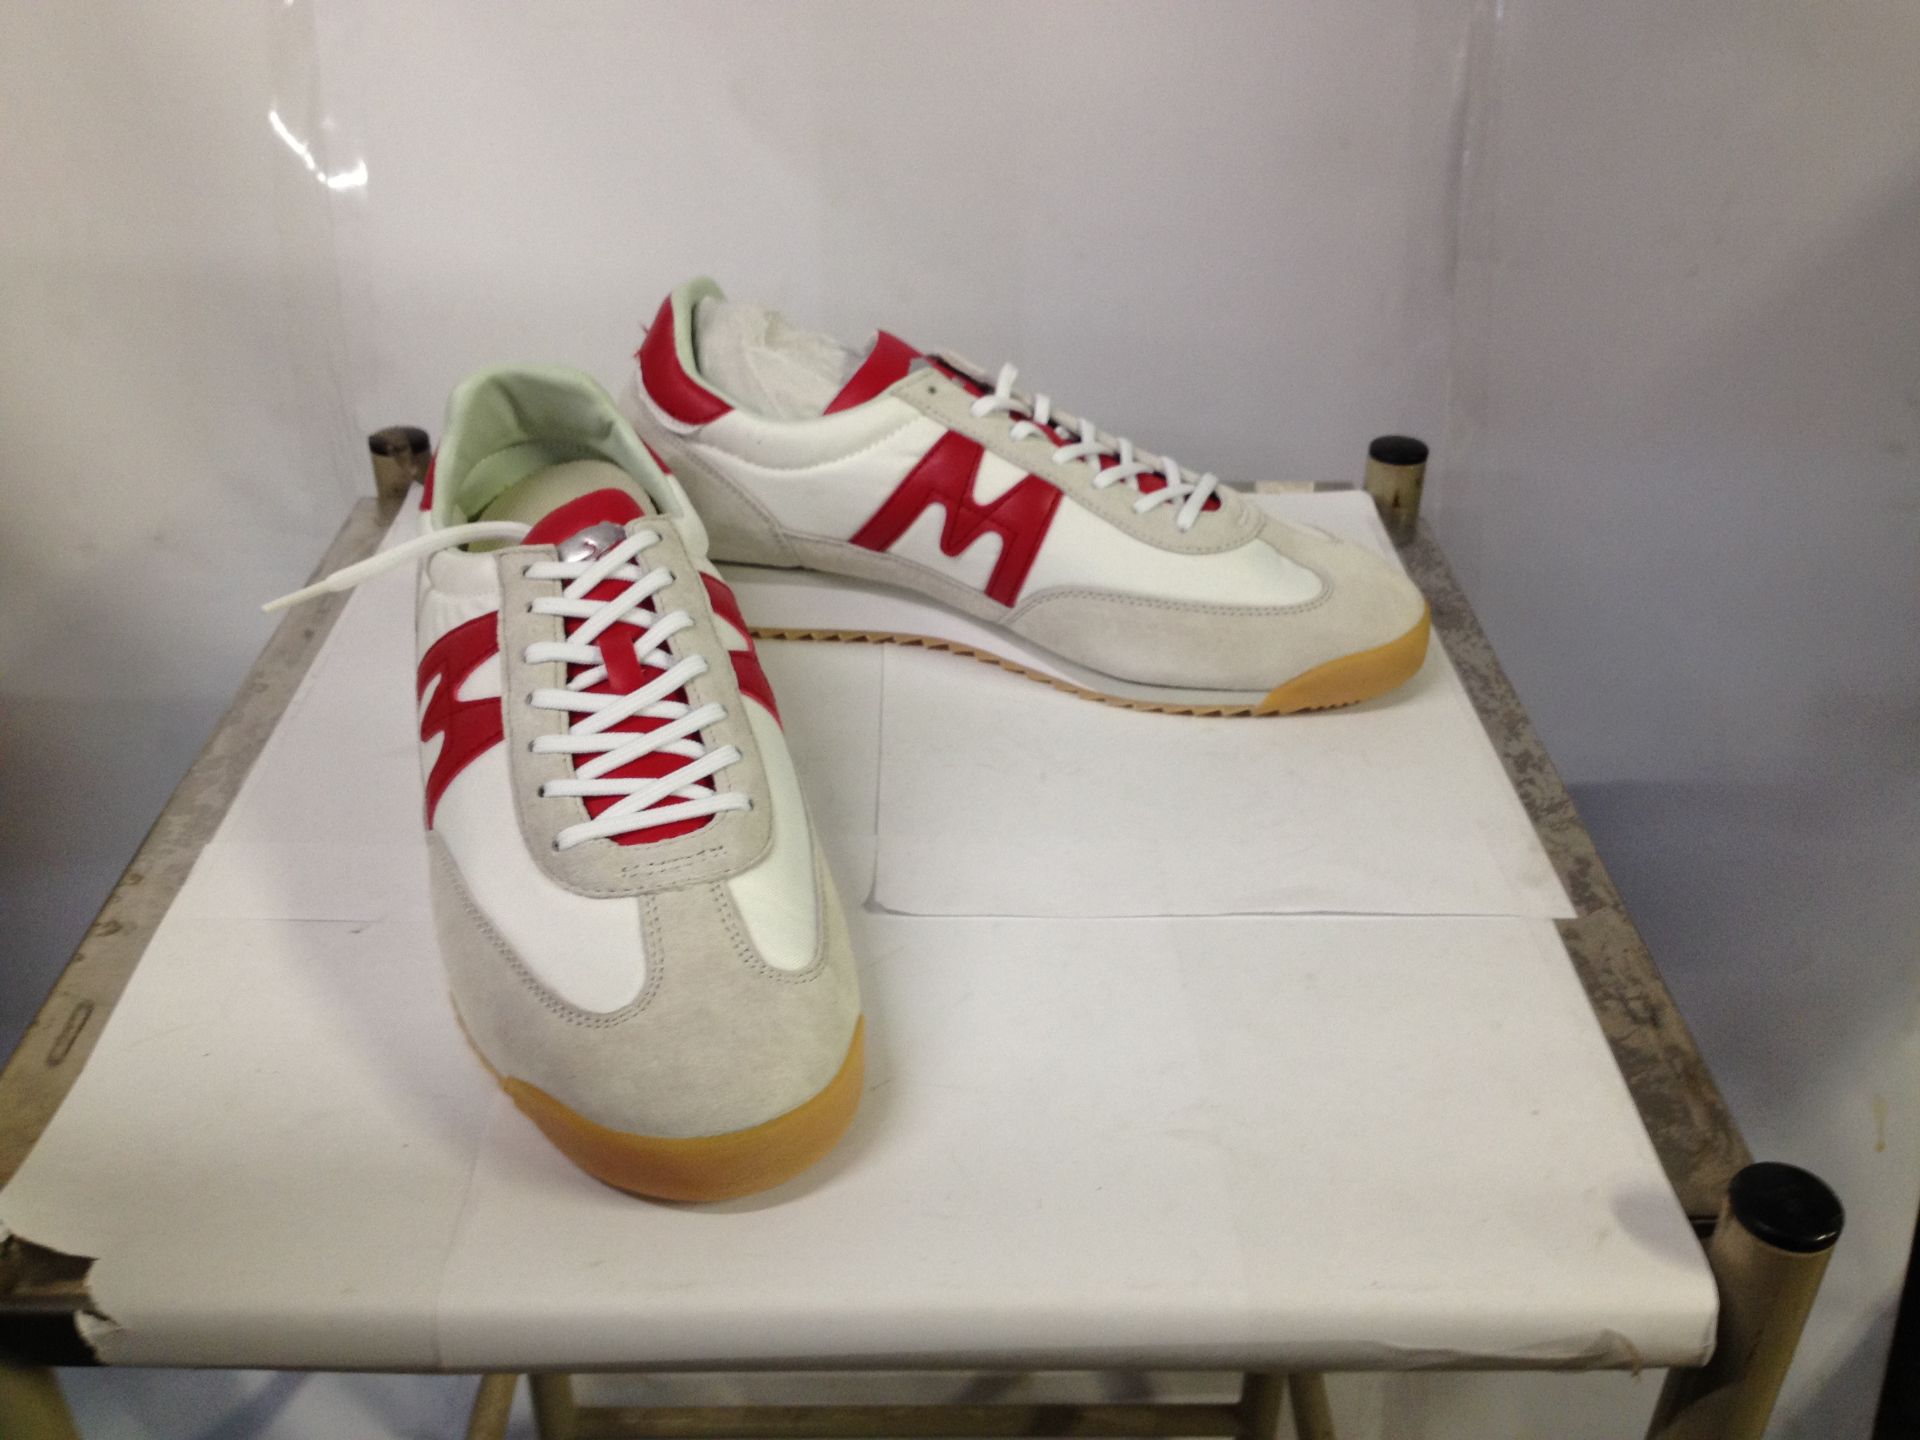 1 x Karhu Trainers | Championair | Colour: Bright White/Racing Red | UK Size: 11 | RRP £ 85 - Image 2 of 2